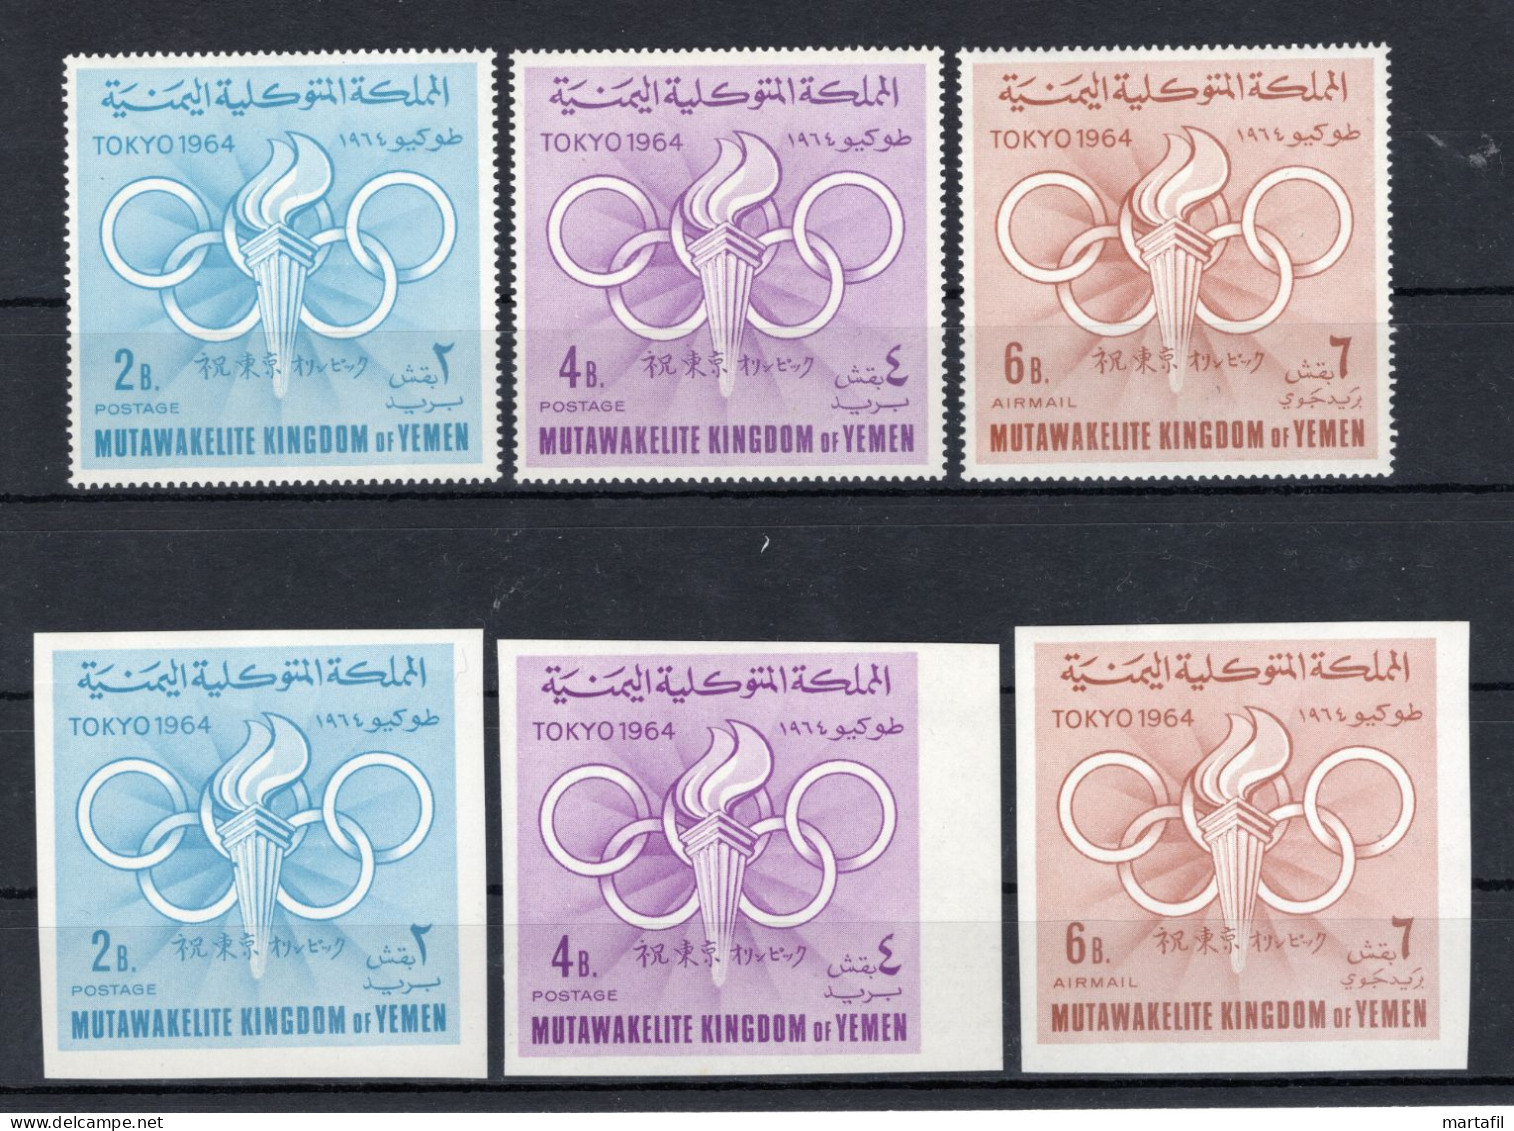 1964 YEMEN SET MNH ** 163/164+A40 Giochi Olimpici Di Tokyo, Olympic Games Of Tokyo + IMPERFORATED - Yémen